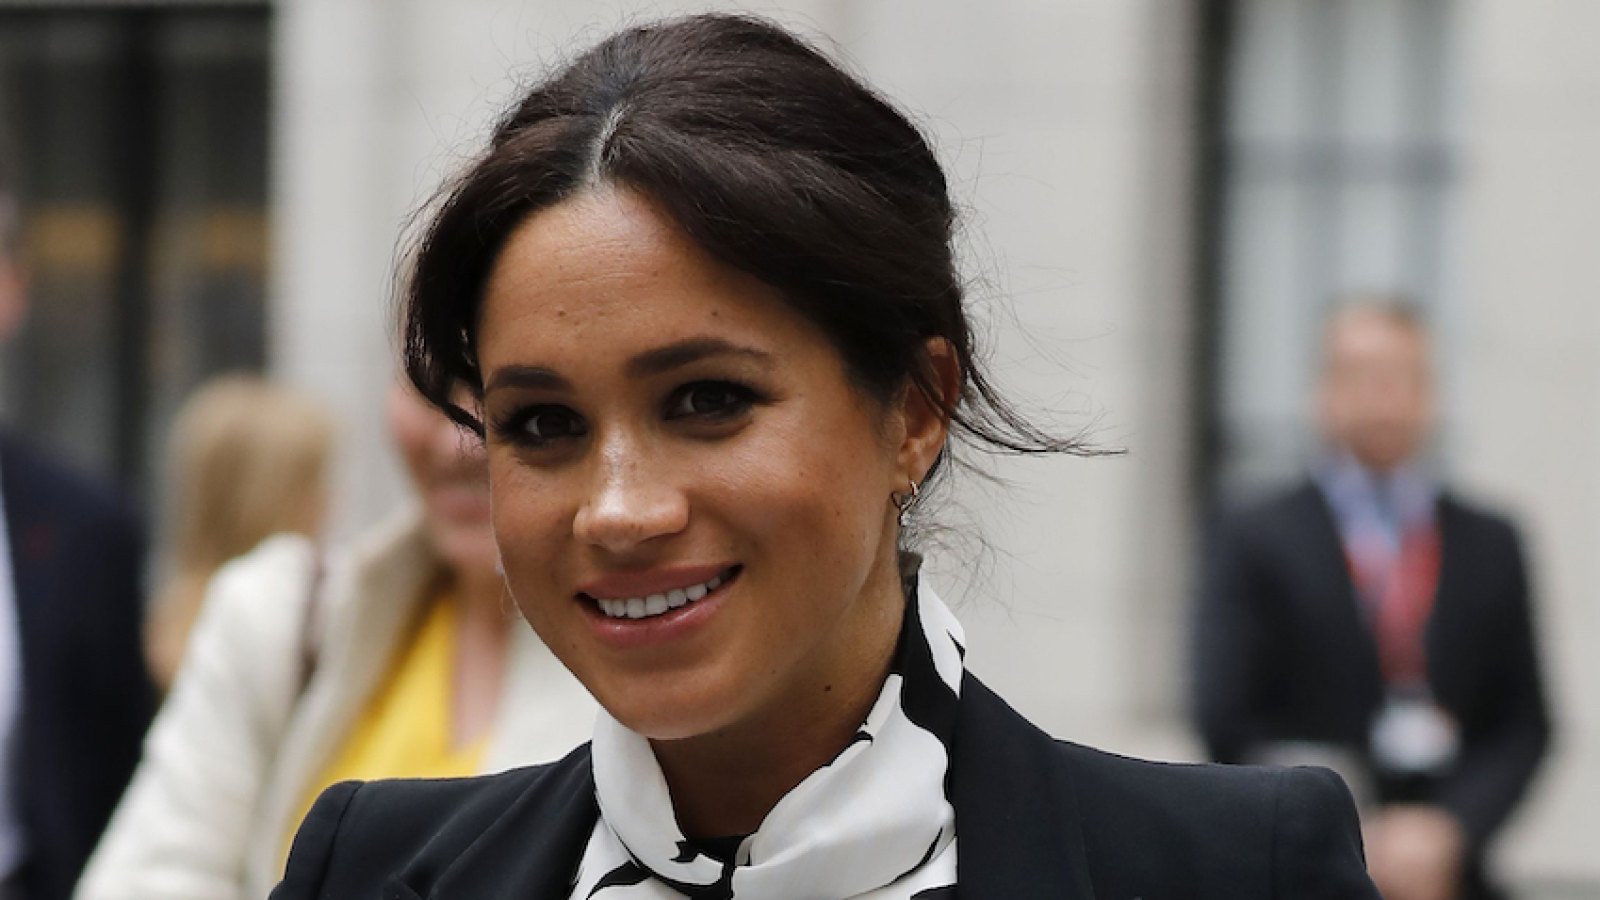 Duchess Meghan’s Assistant Private Secretary Amy Pickerill Quits, Fourth Staff Member to Leave